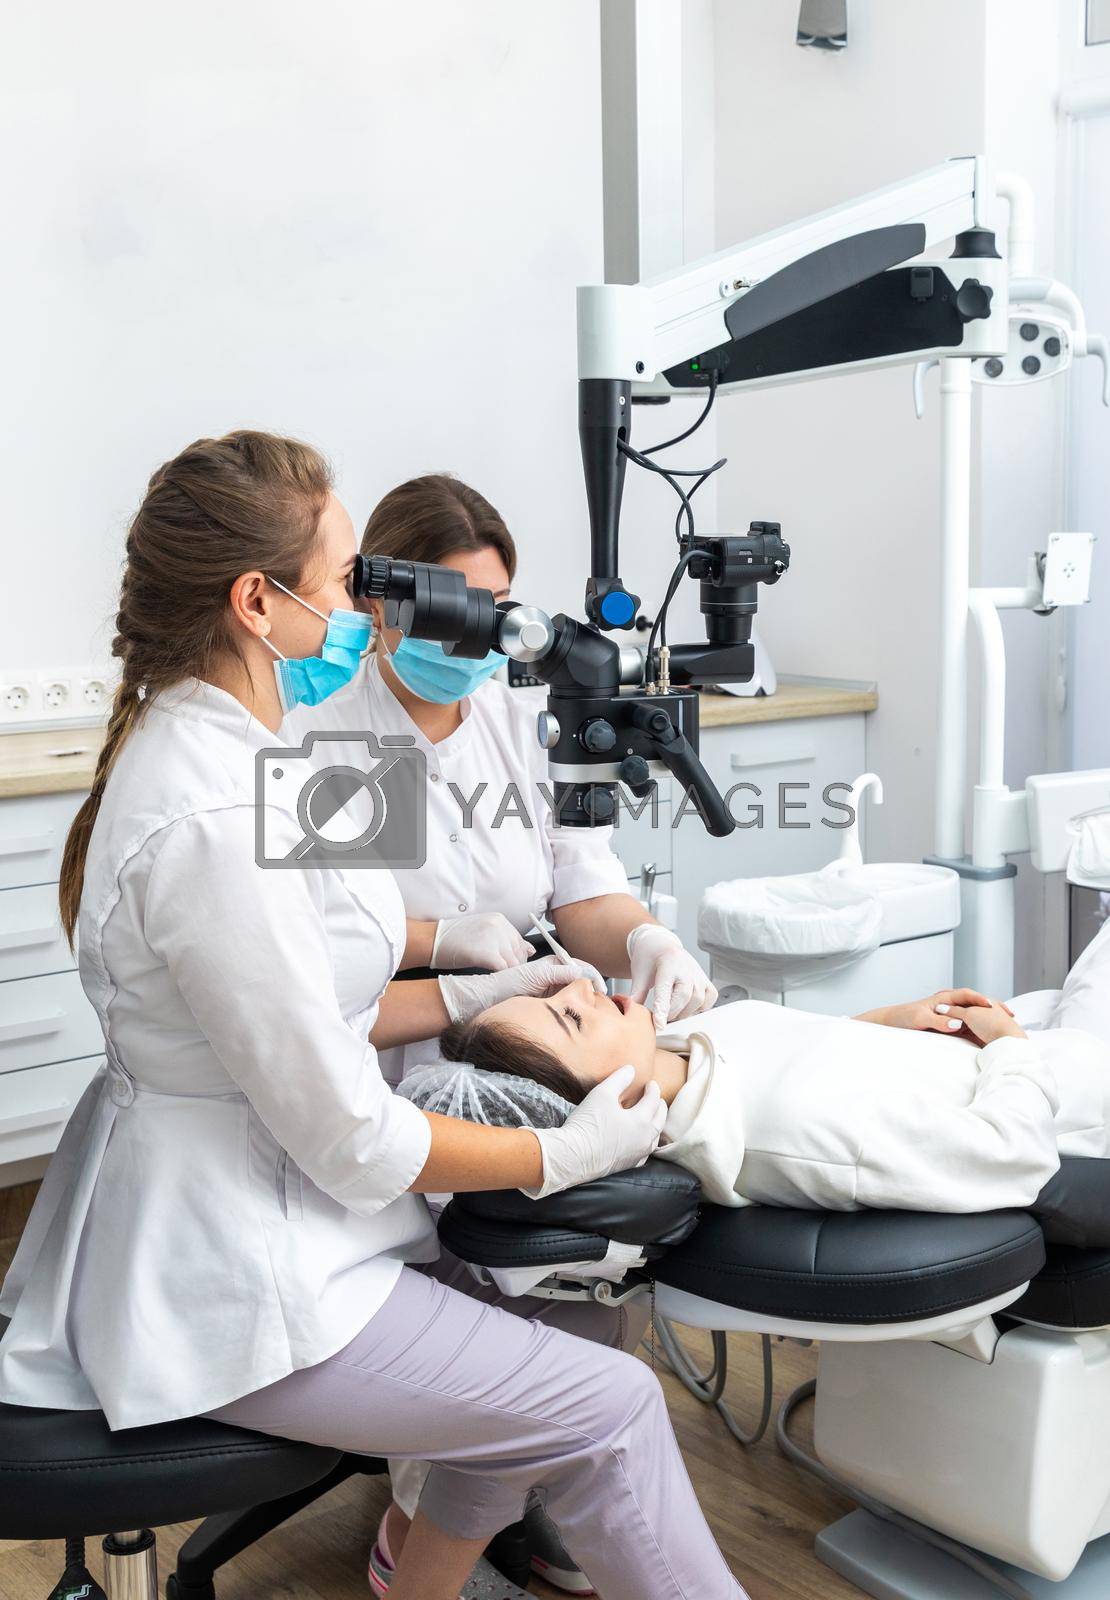 Female dentist using dental microscope treating patient teeth at dental clinic office. Medicine, dentistry and health care concept